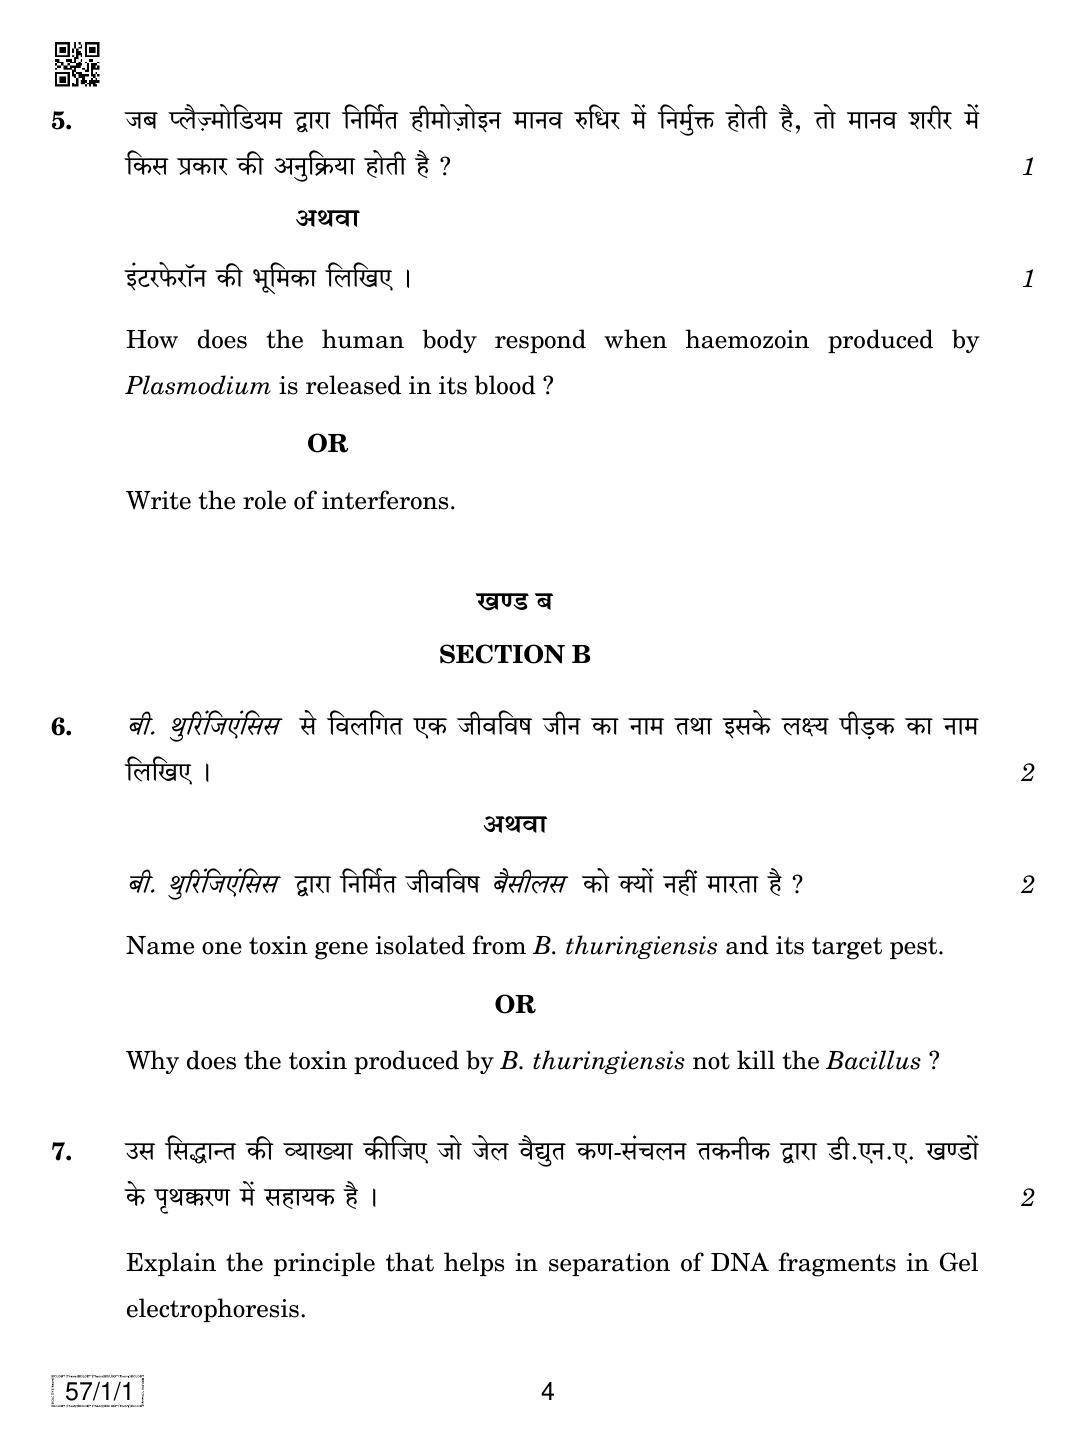 CBSE Class 12 57-1-1 BIOLOGY 2019 Compartment Question Paper - Page 4